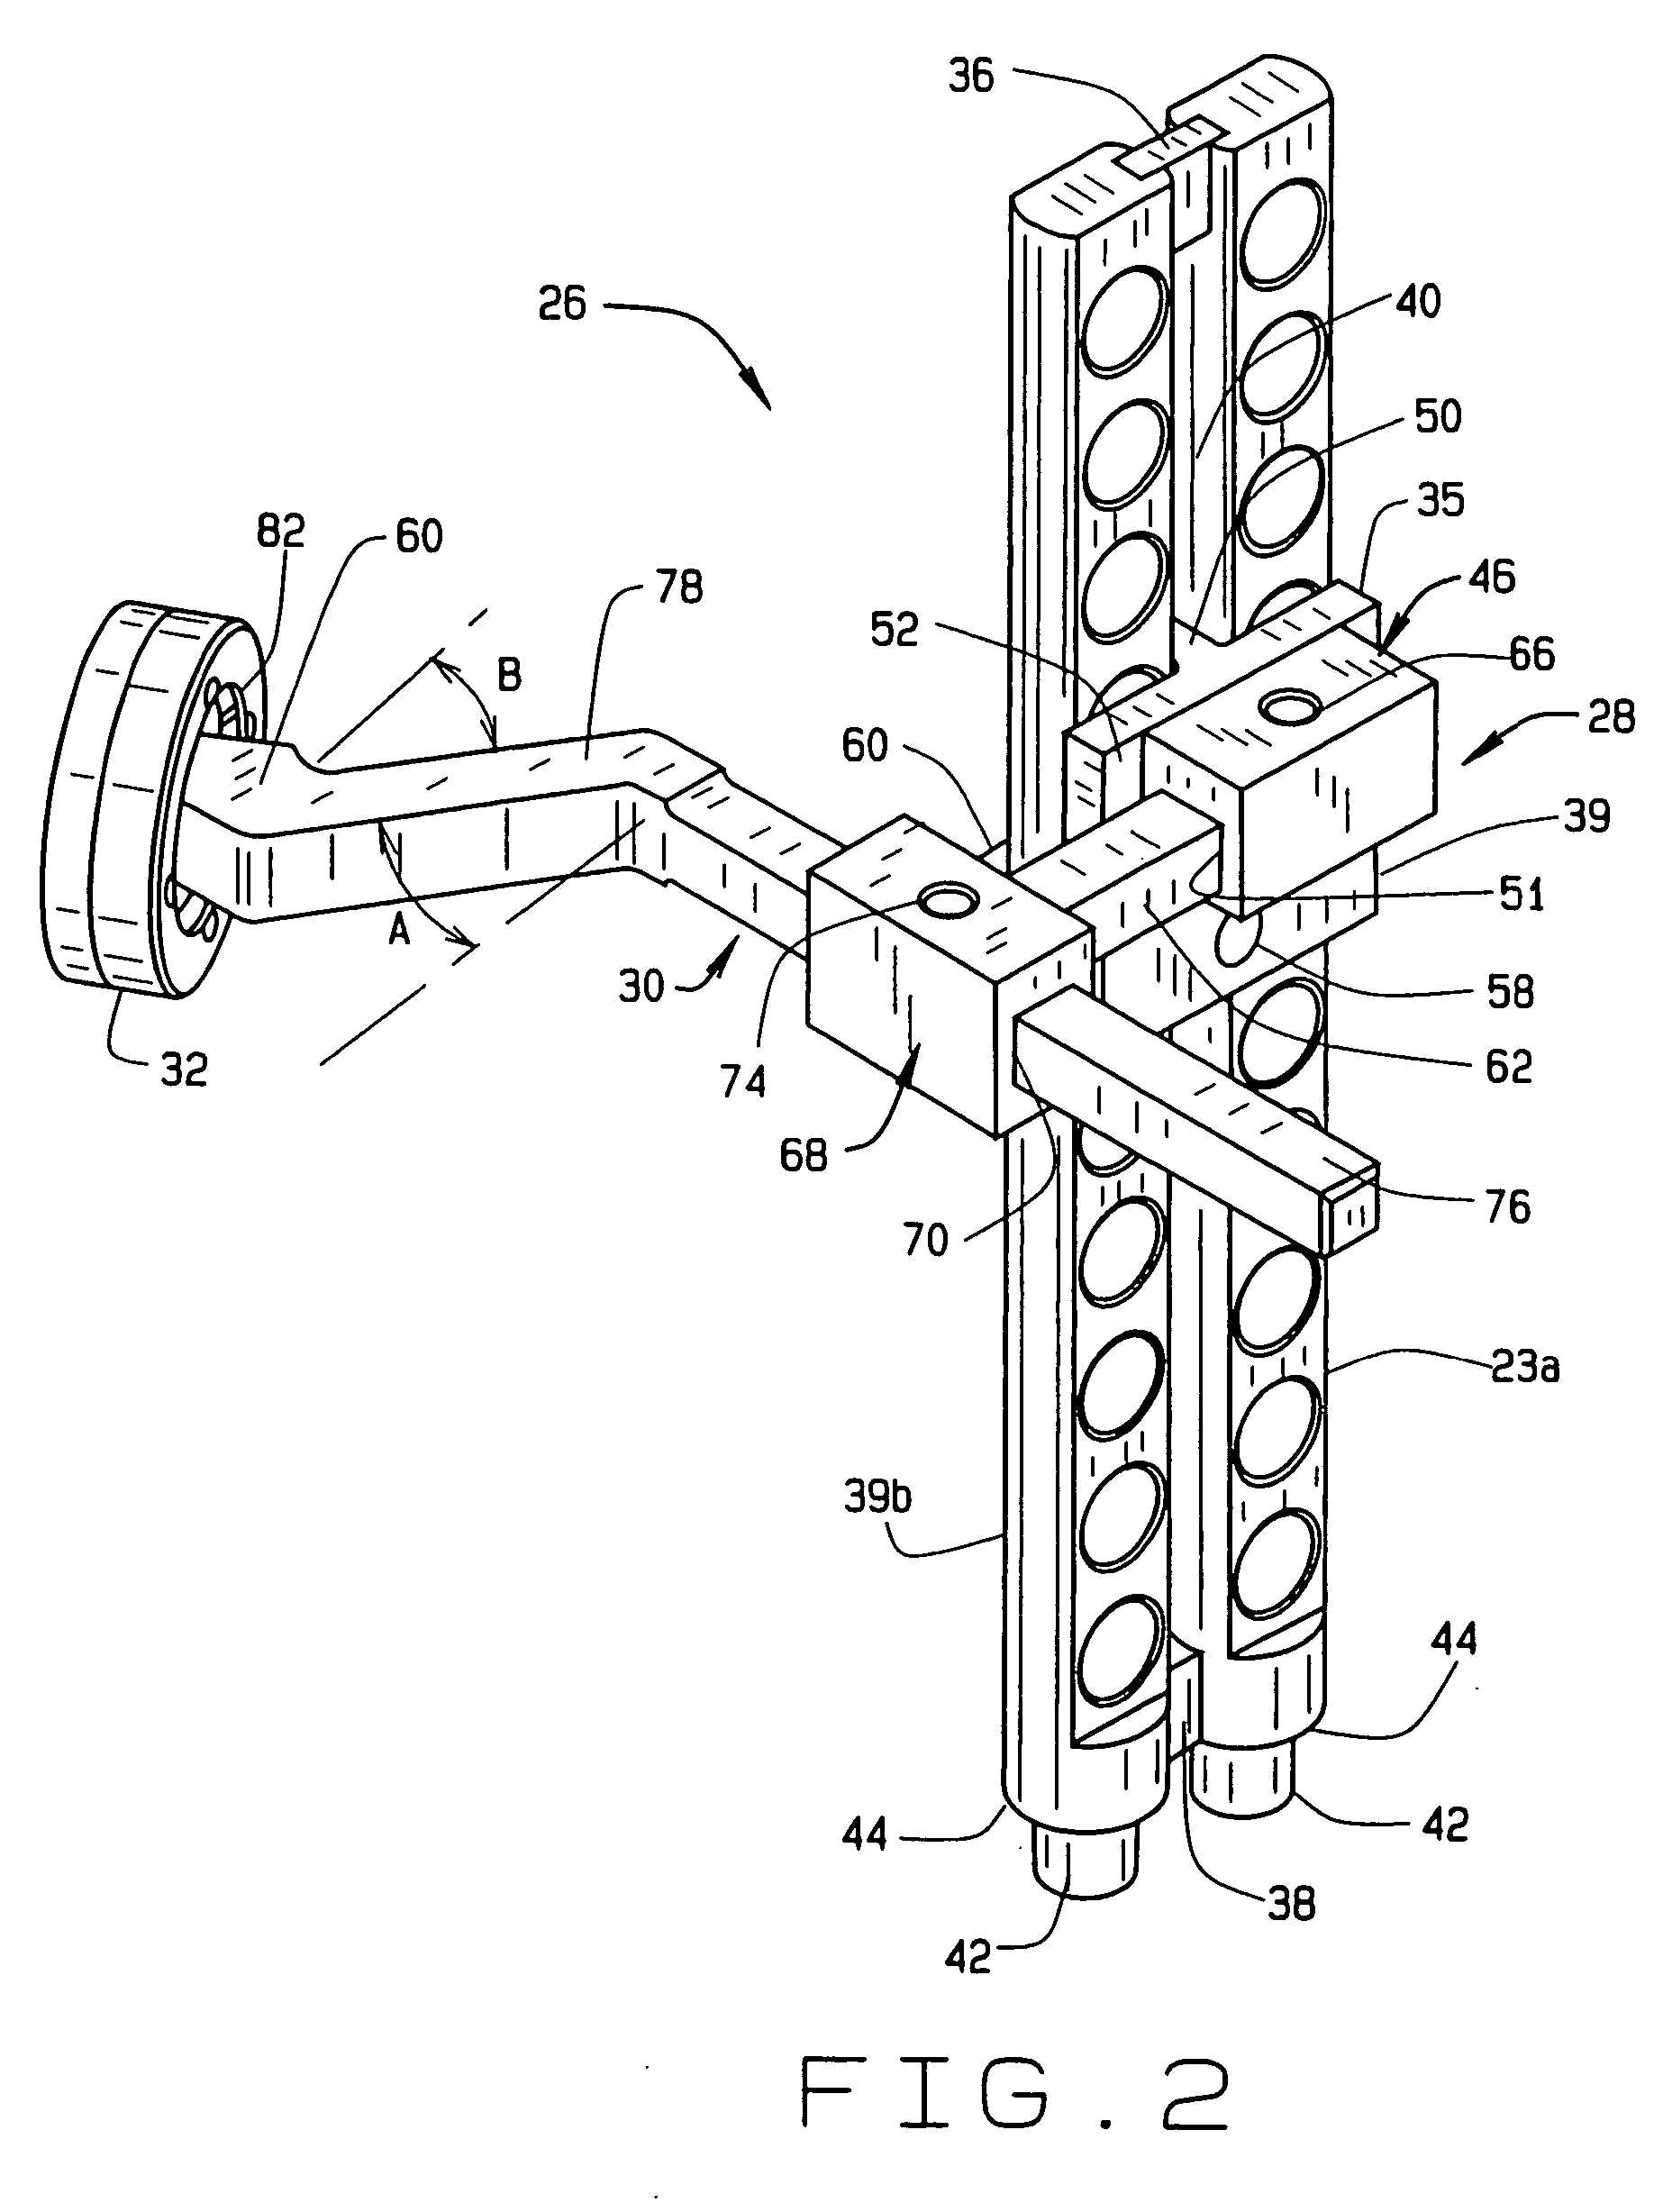 Surgical fixture device and method for supporting a patient during surgery